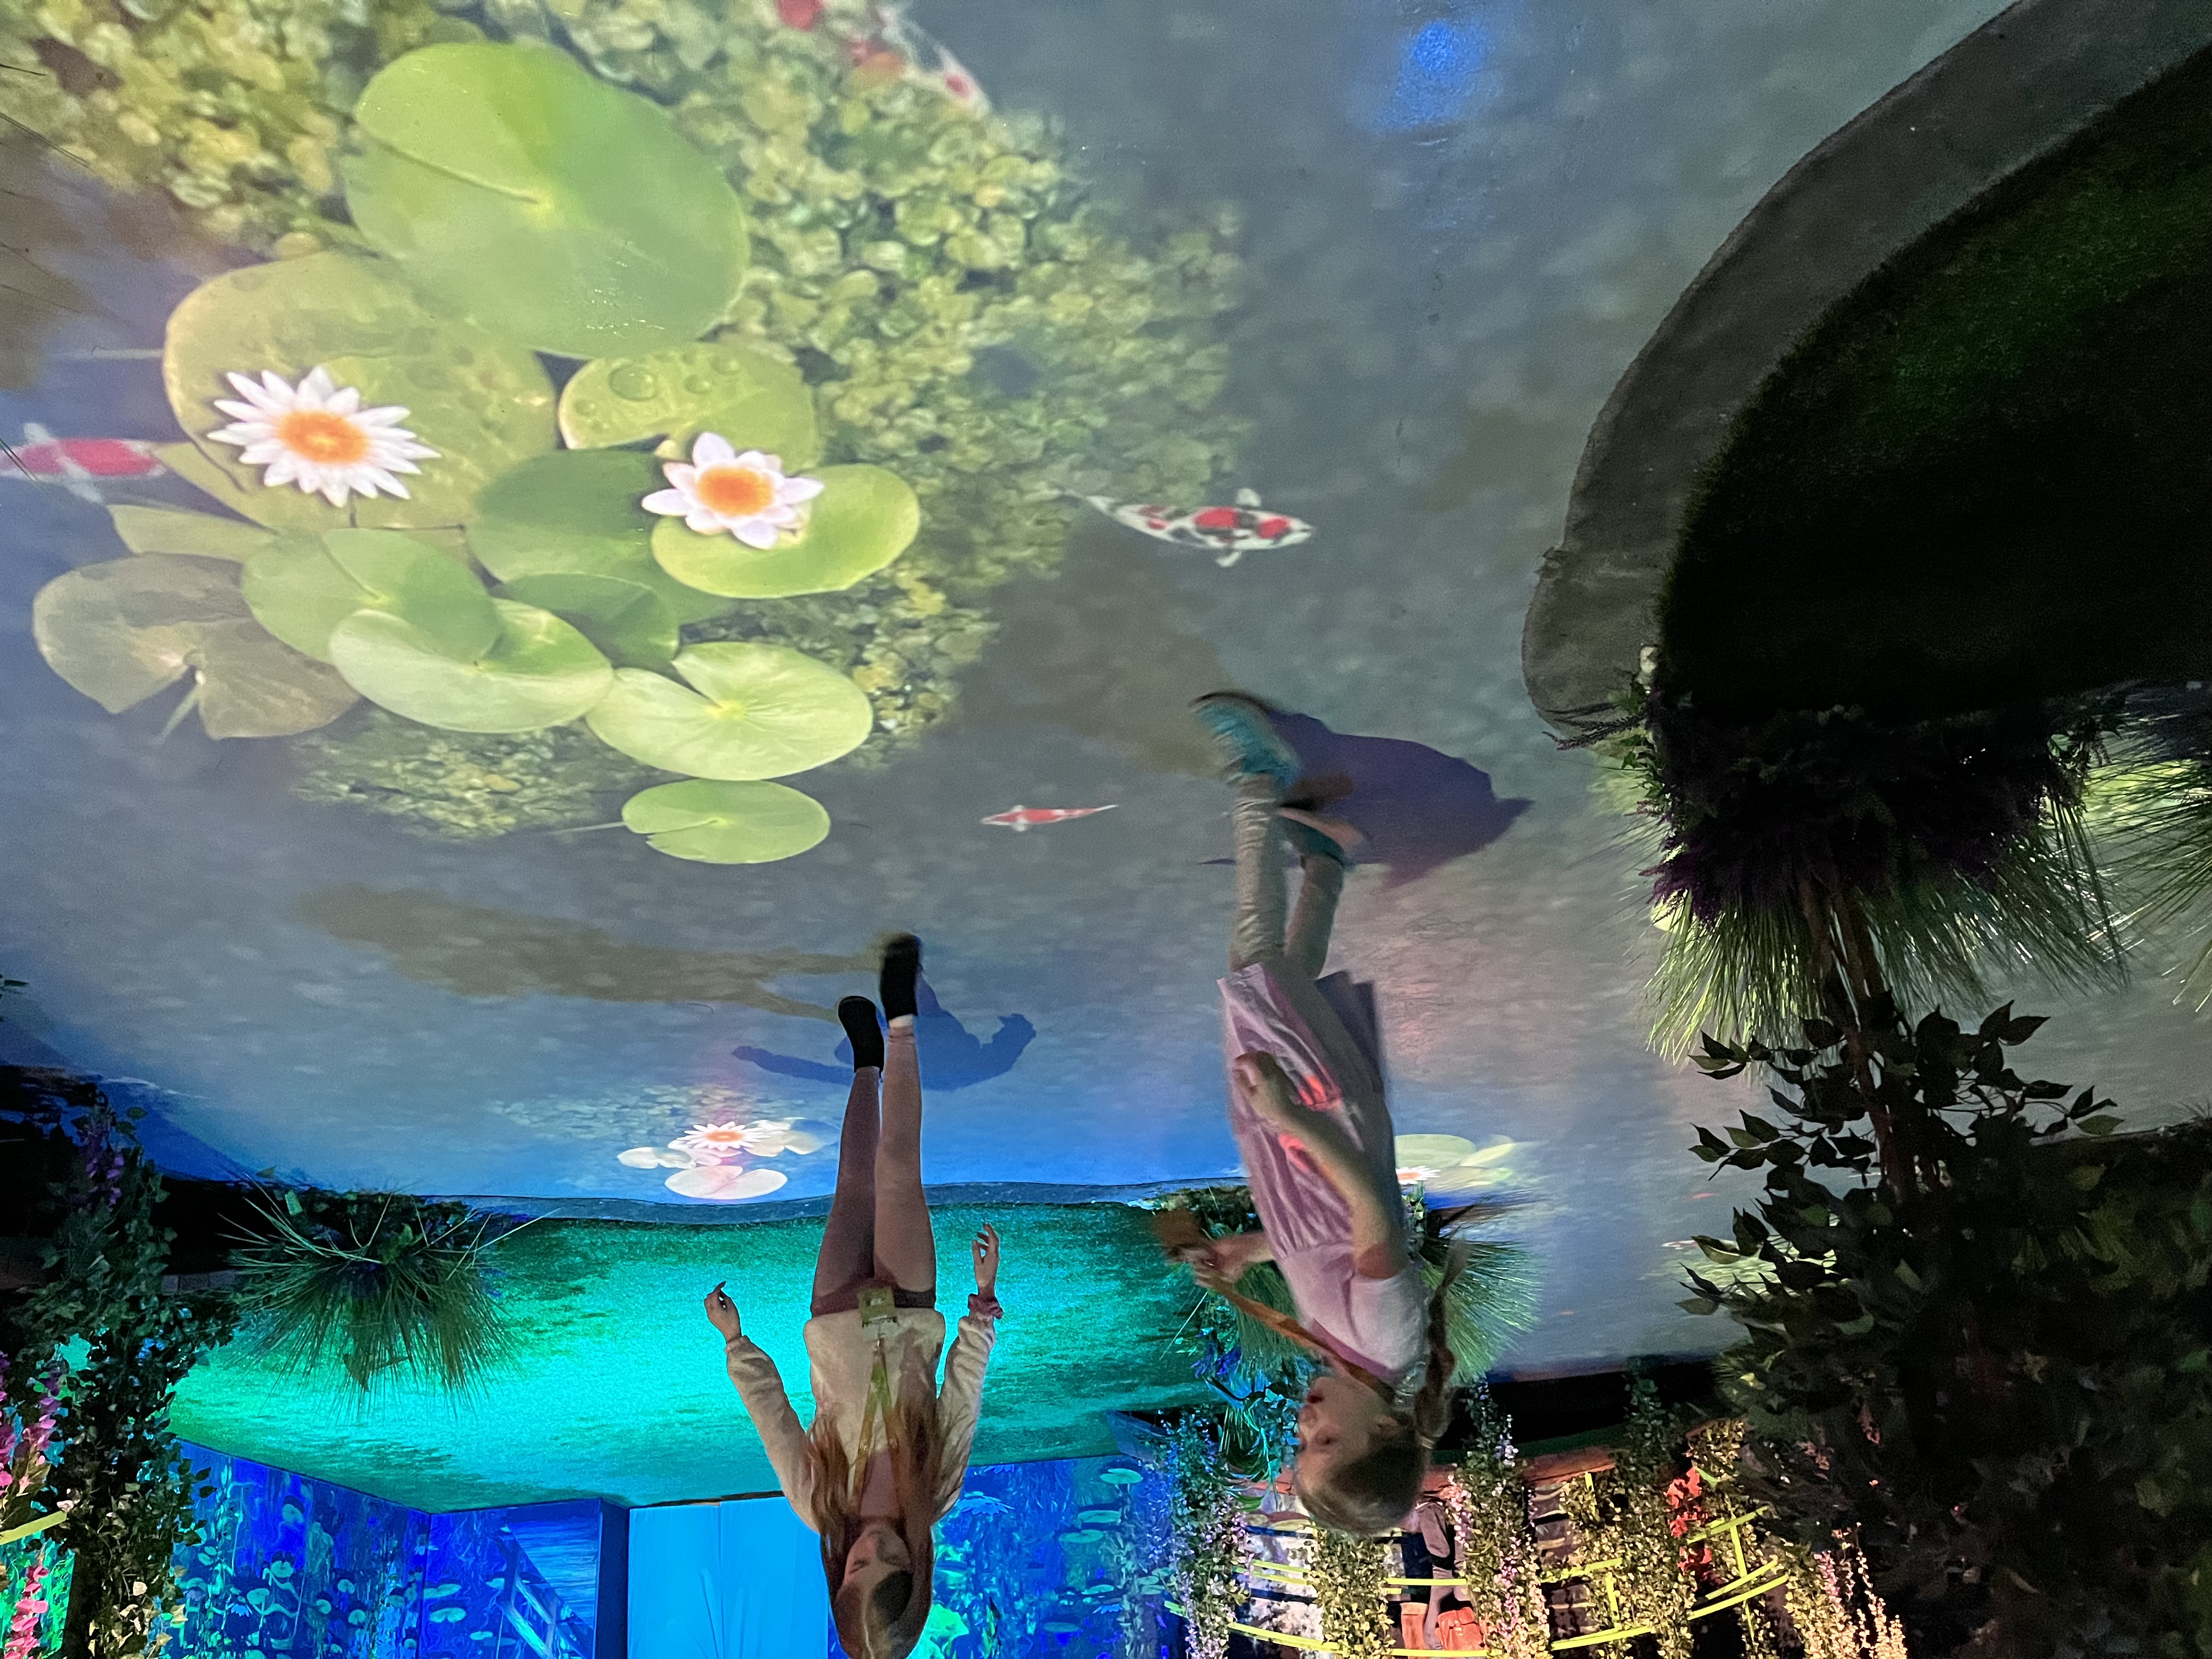 A Monet painting comes to life in an immersive experience in Atlanta.